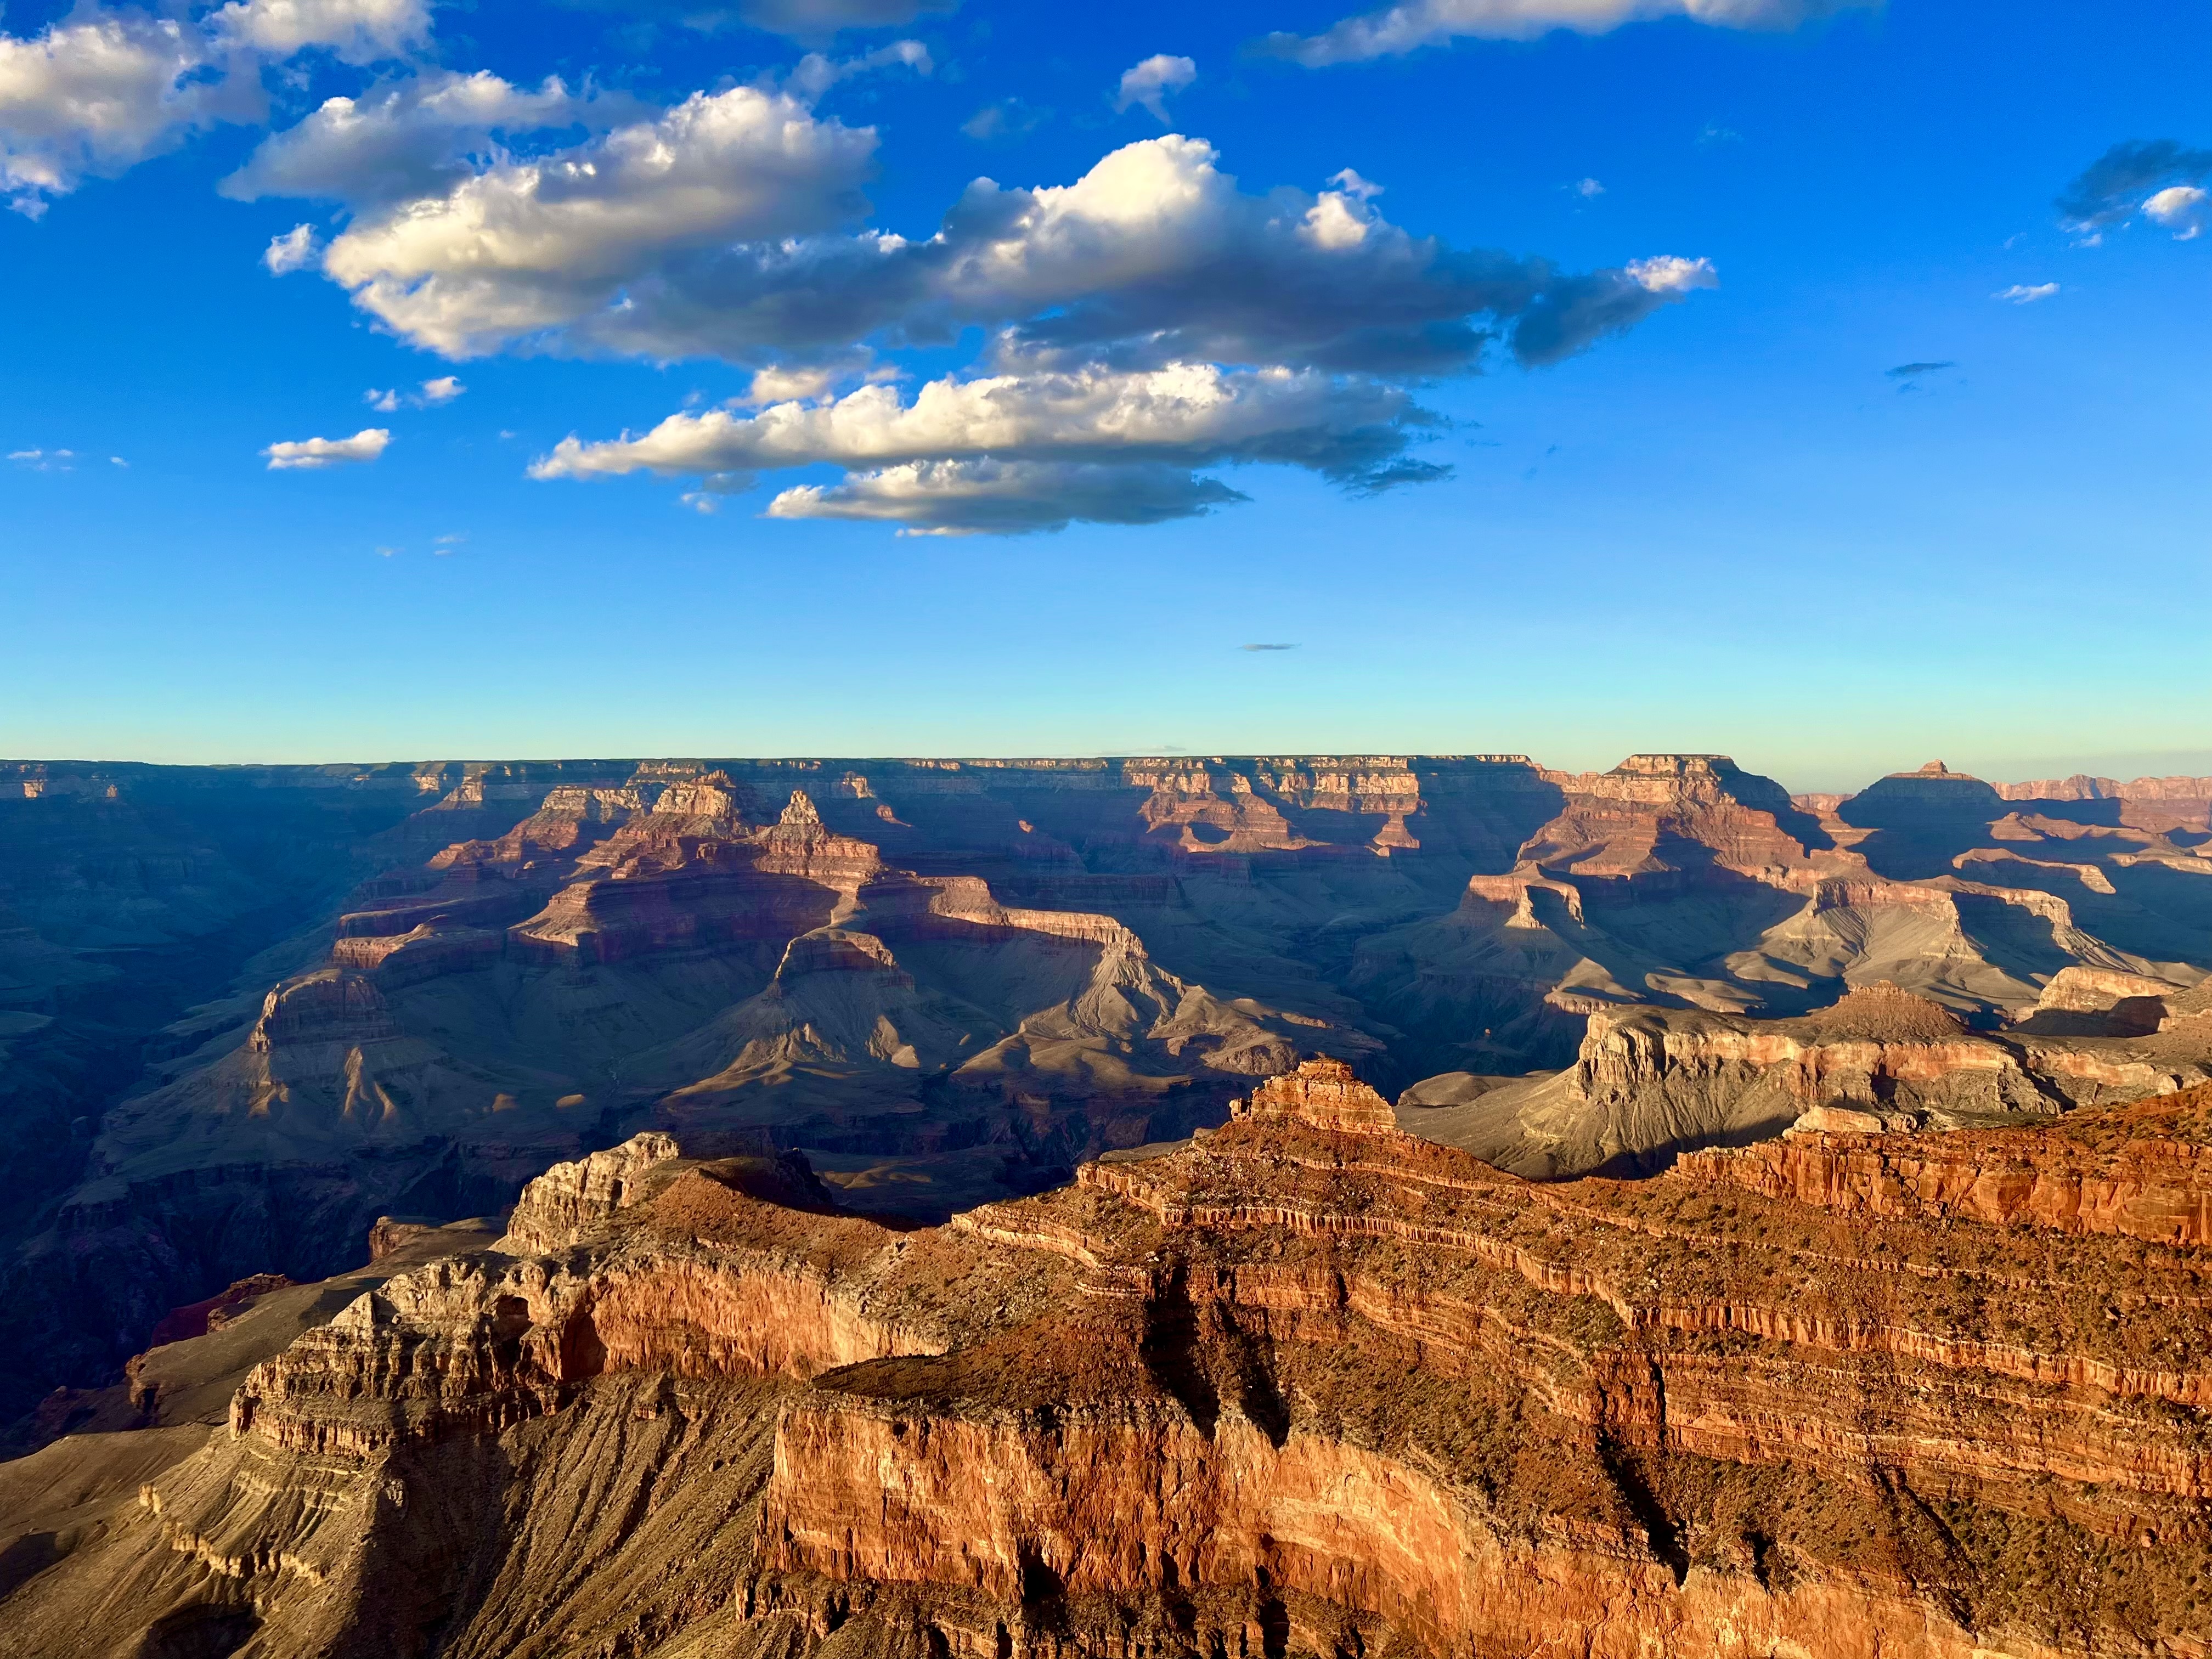 The aerial view of the grand canyon III in the picture